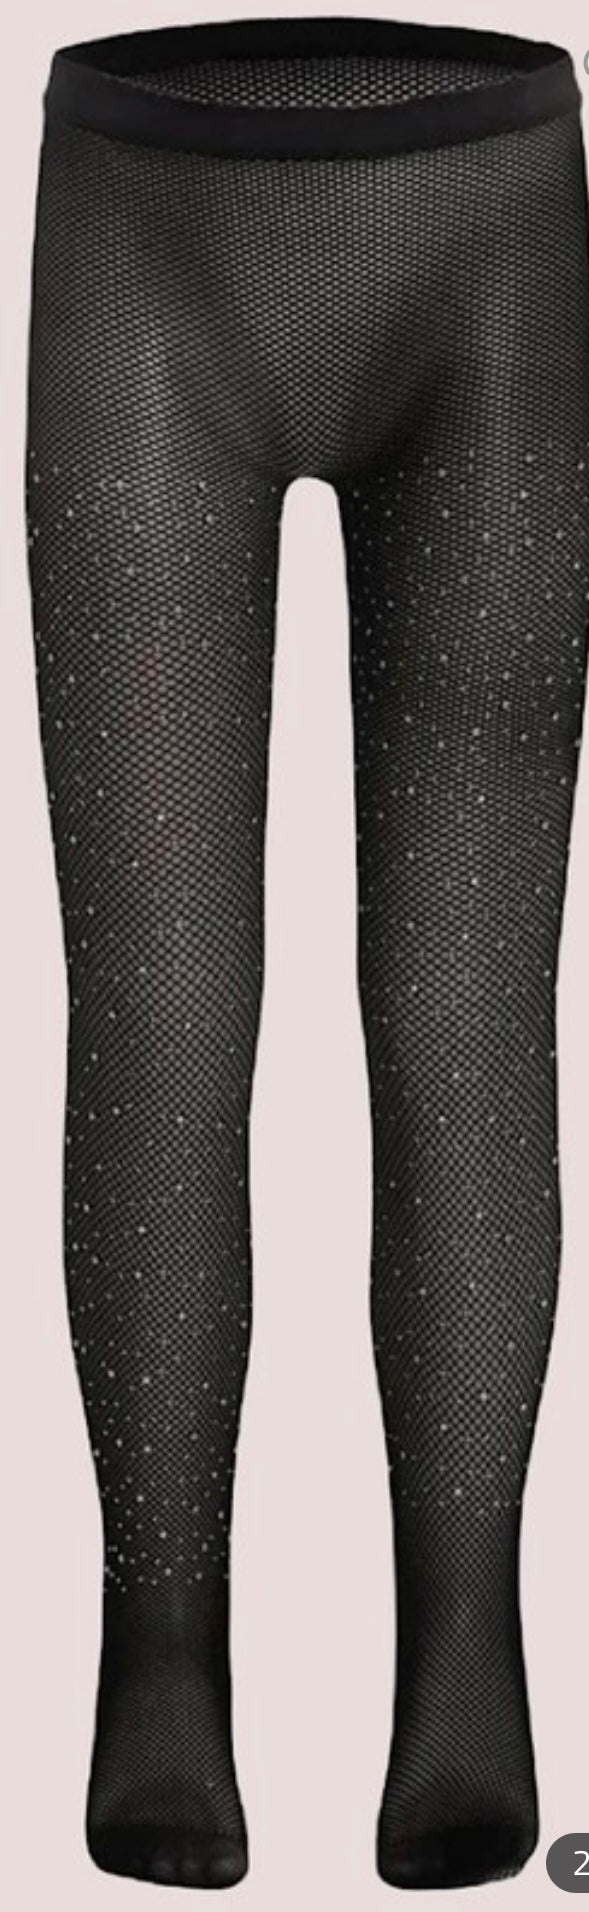 Kids Bling Tights